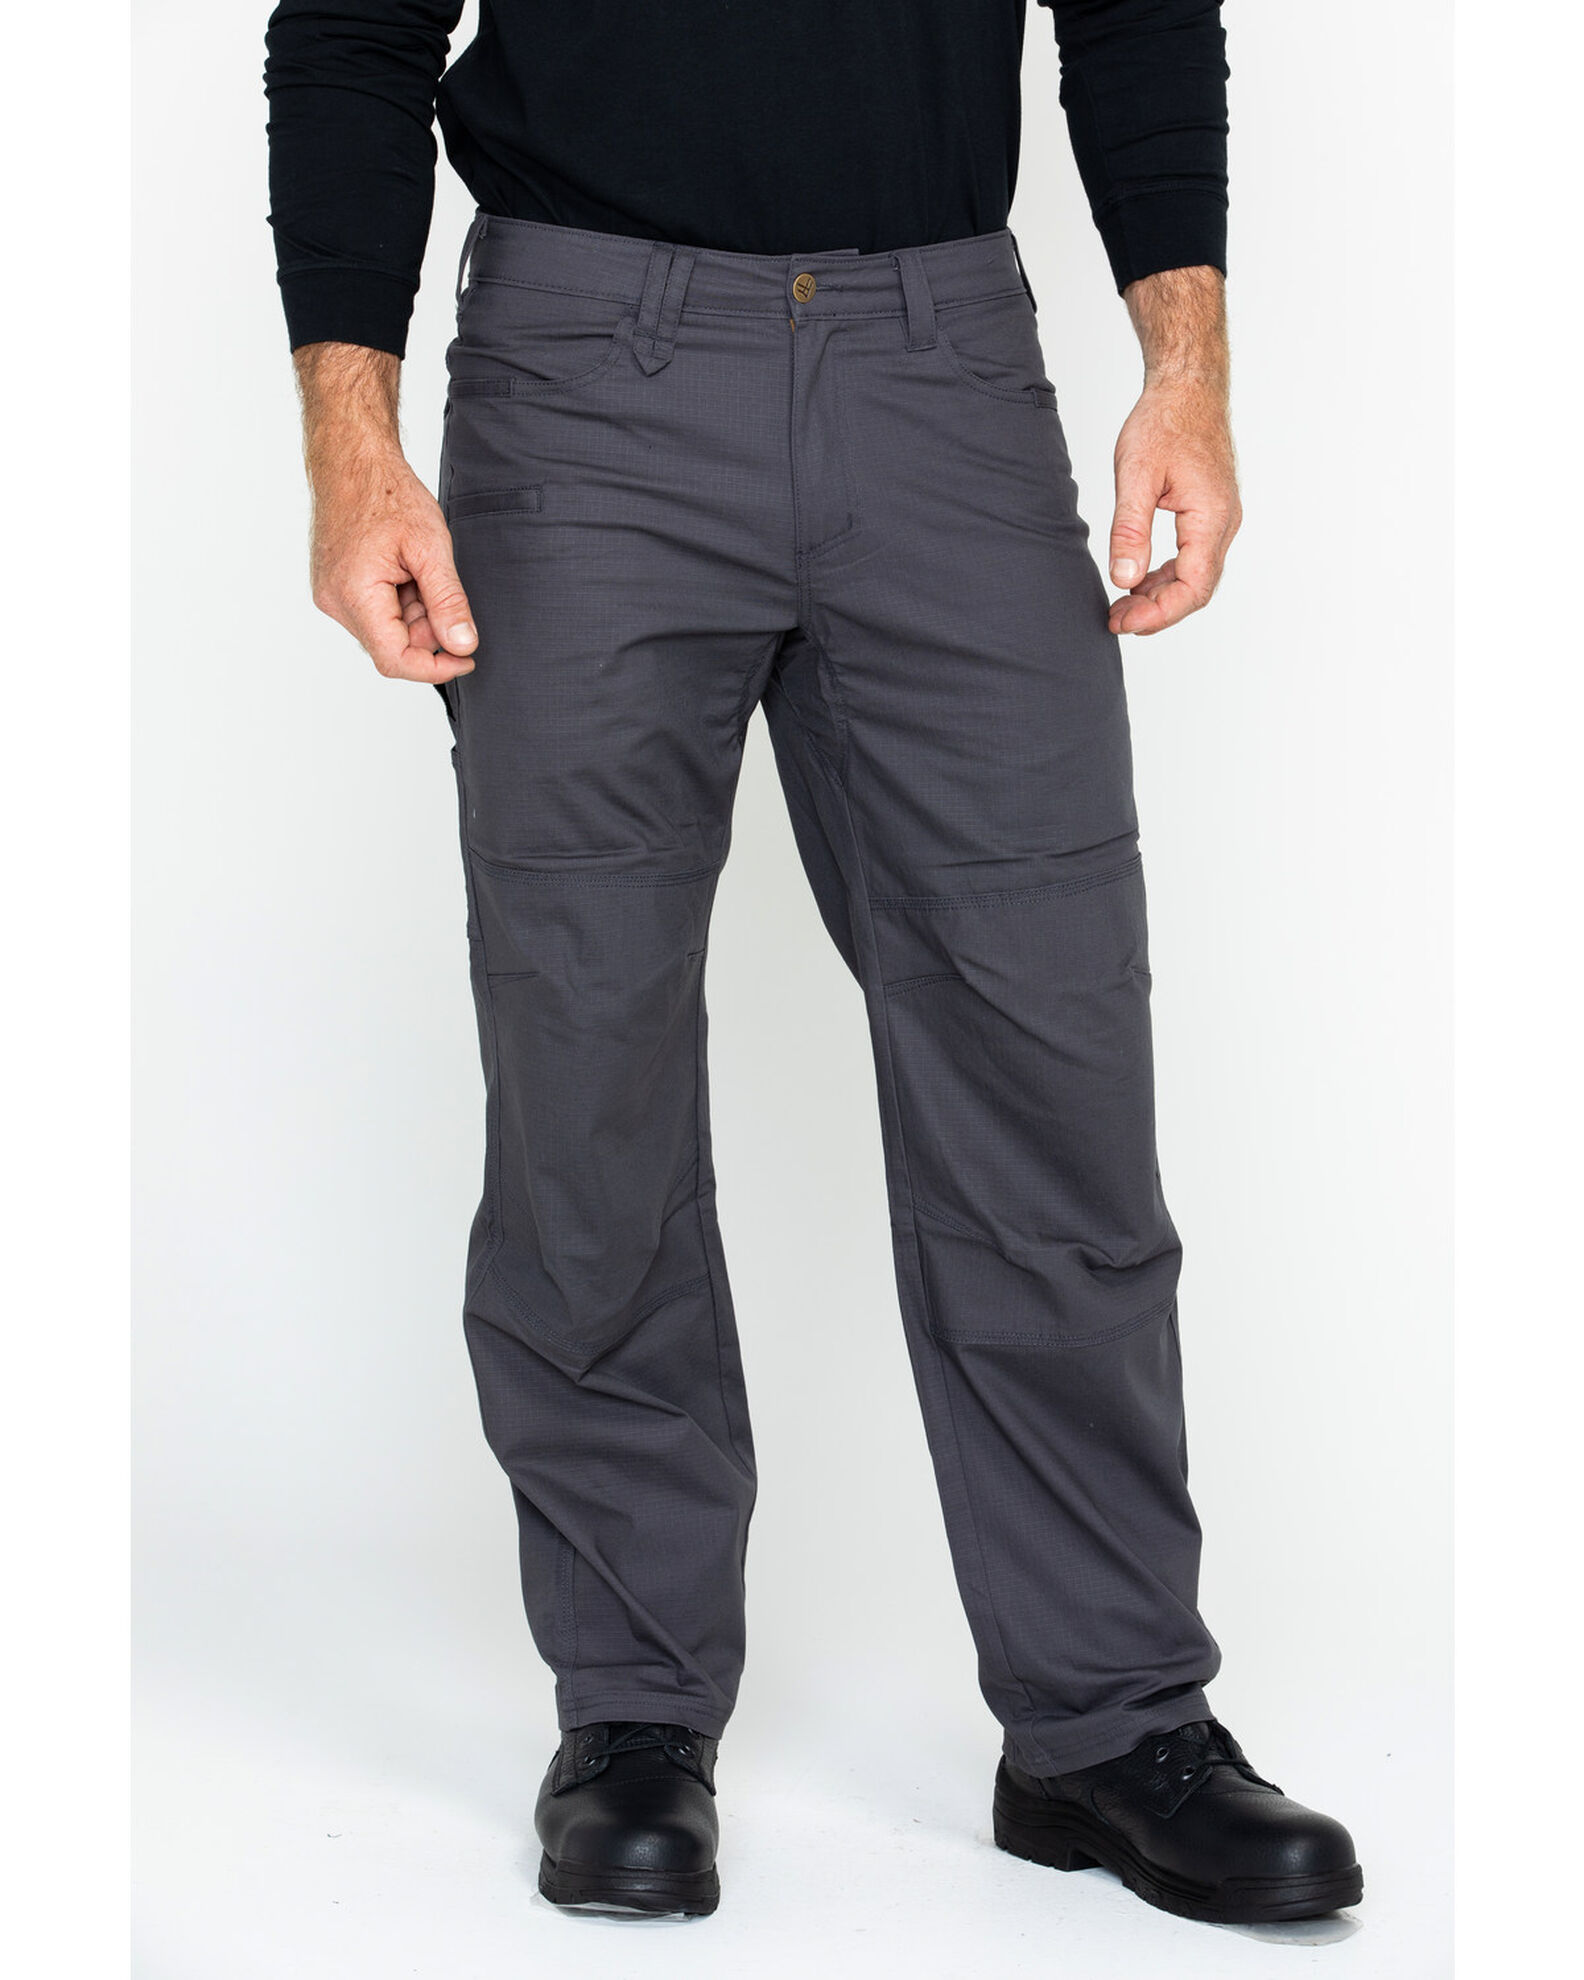 Product Name: Hawx Men's Stretch Ripstop Utility Work Pants